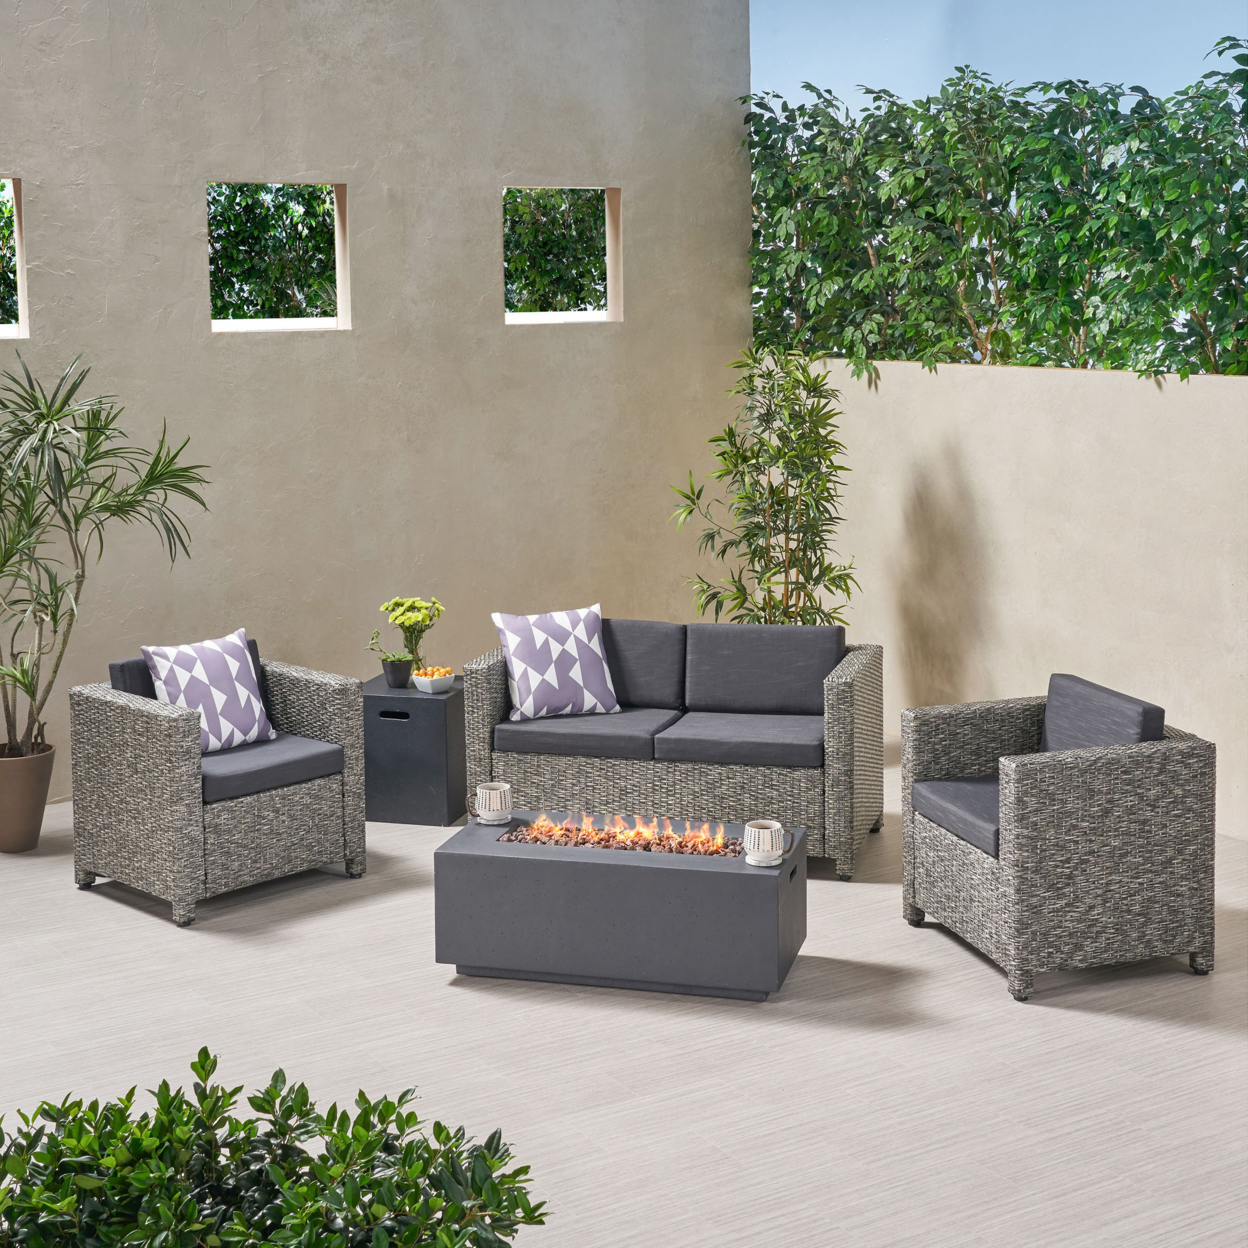 Sigrid Outdoor 4 Seater Wicker Chat Set With Fire Pit - Mix Black + Dark Gray